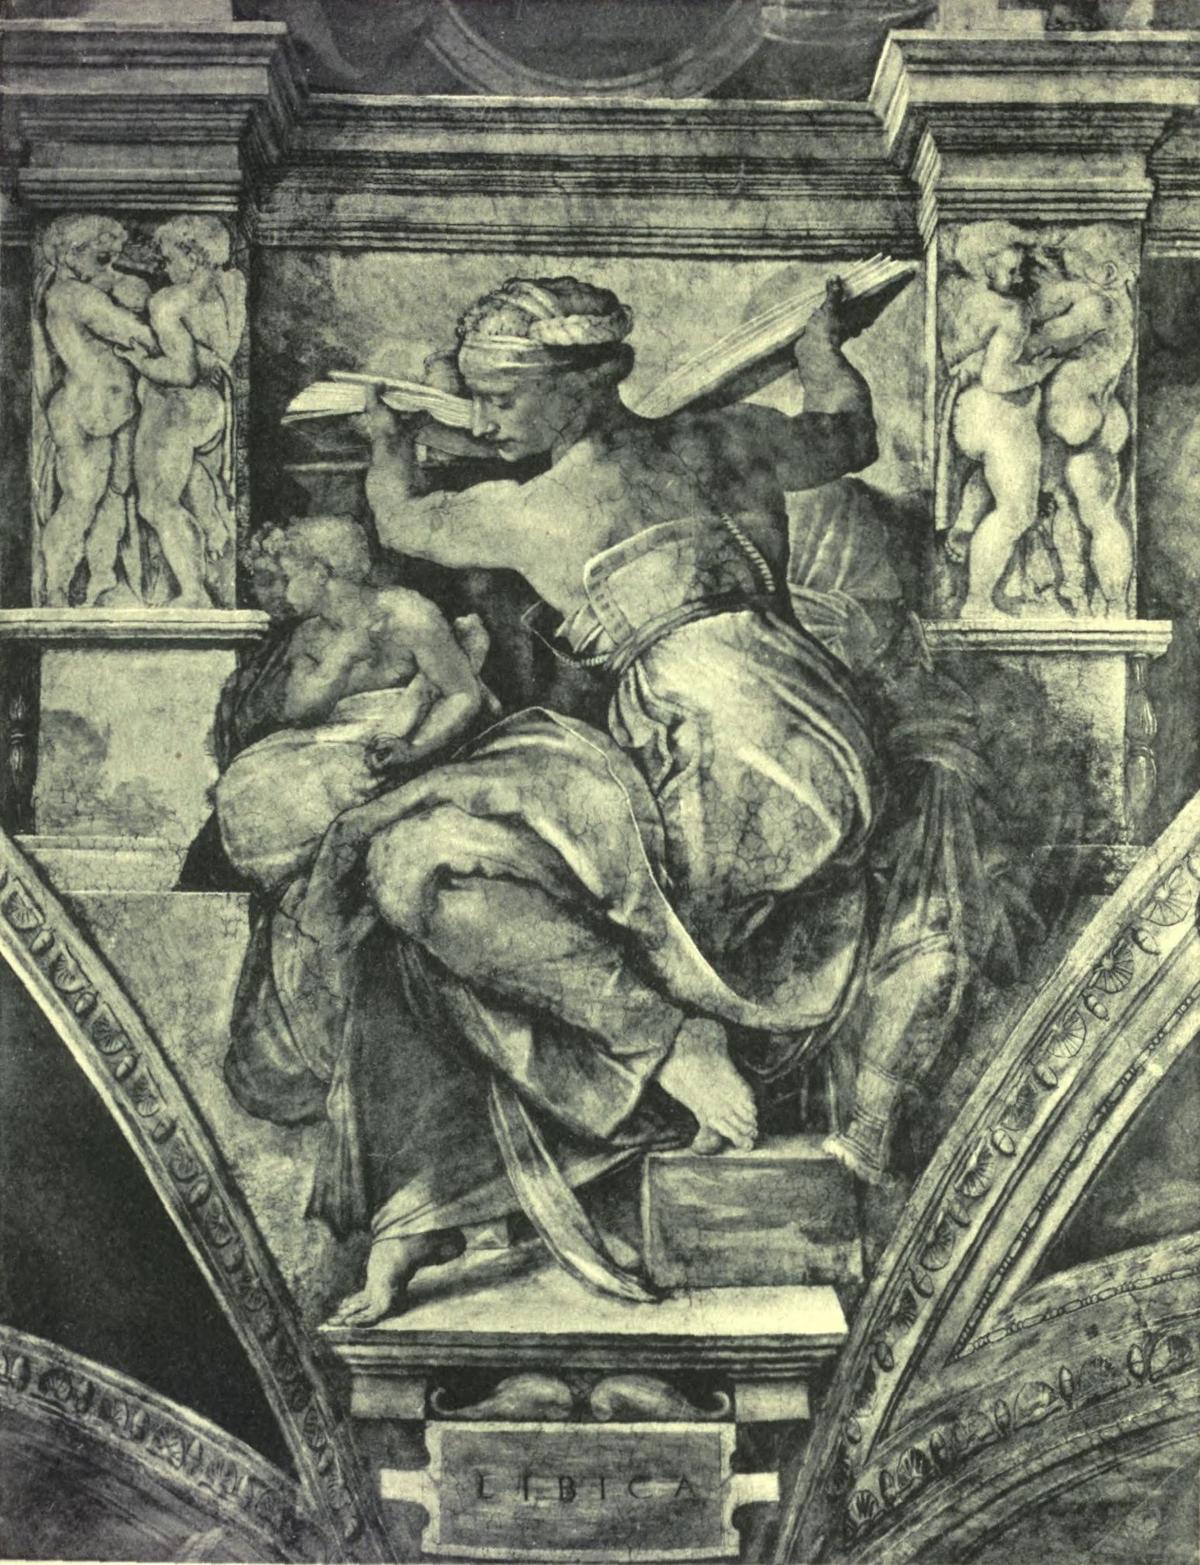 THE LYBIAN SIBYL (After the fresco by Michelangelo. Rome: The Vatican, Sistine Chapel) Anderson